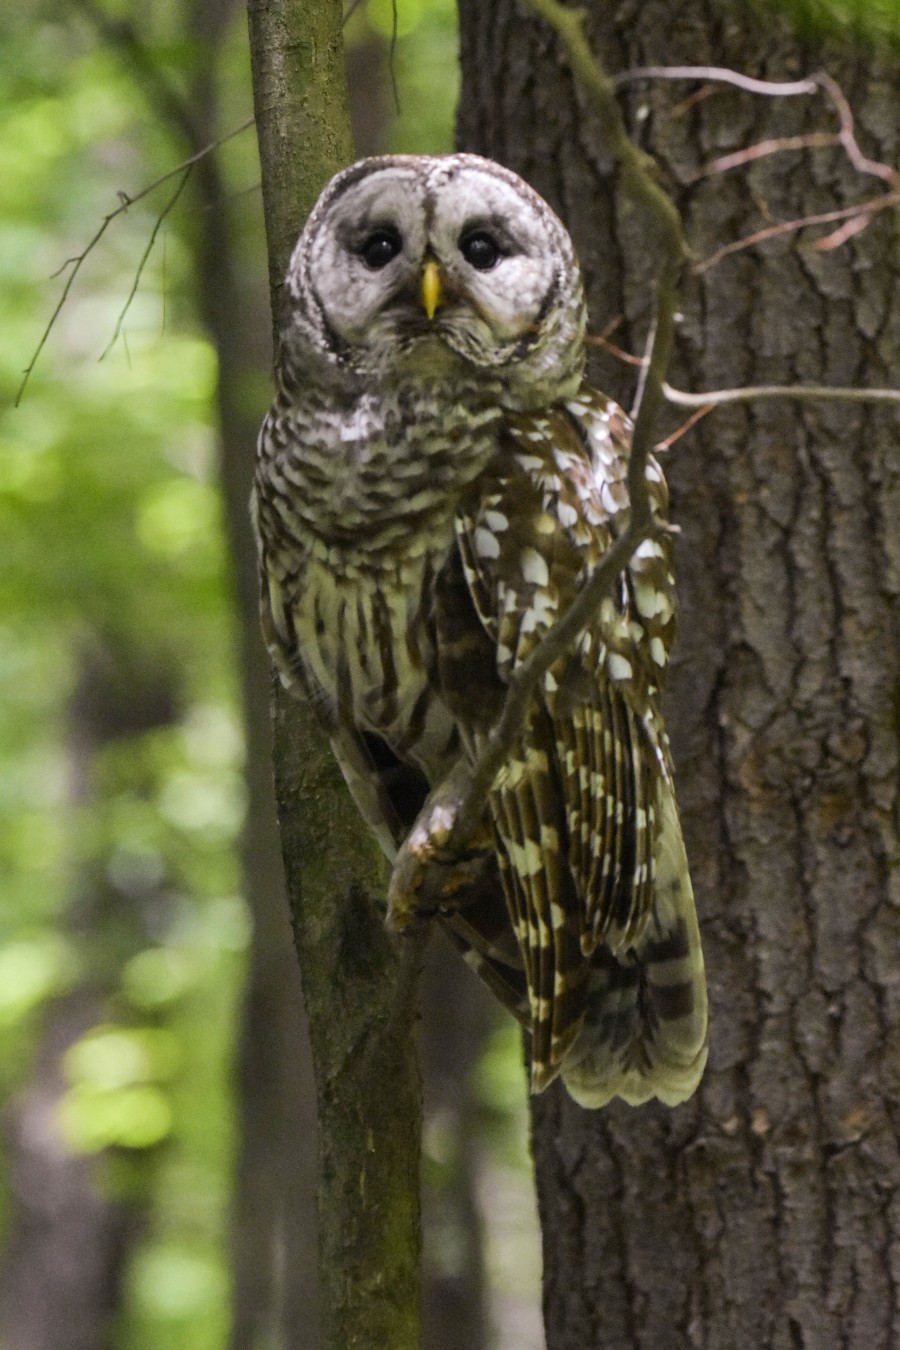 Female Barred Owl perched in tree